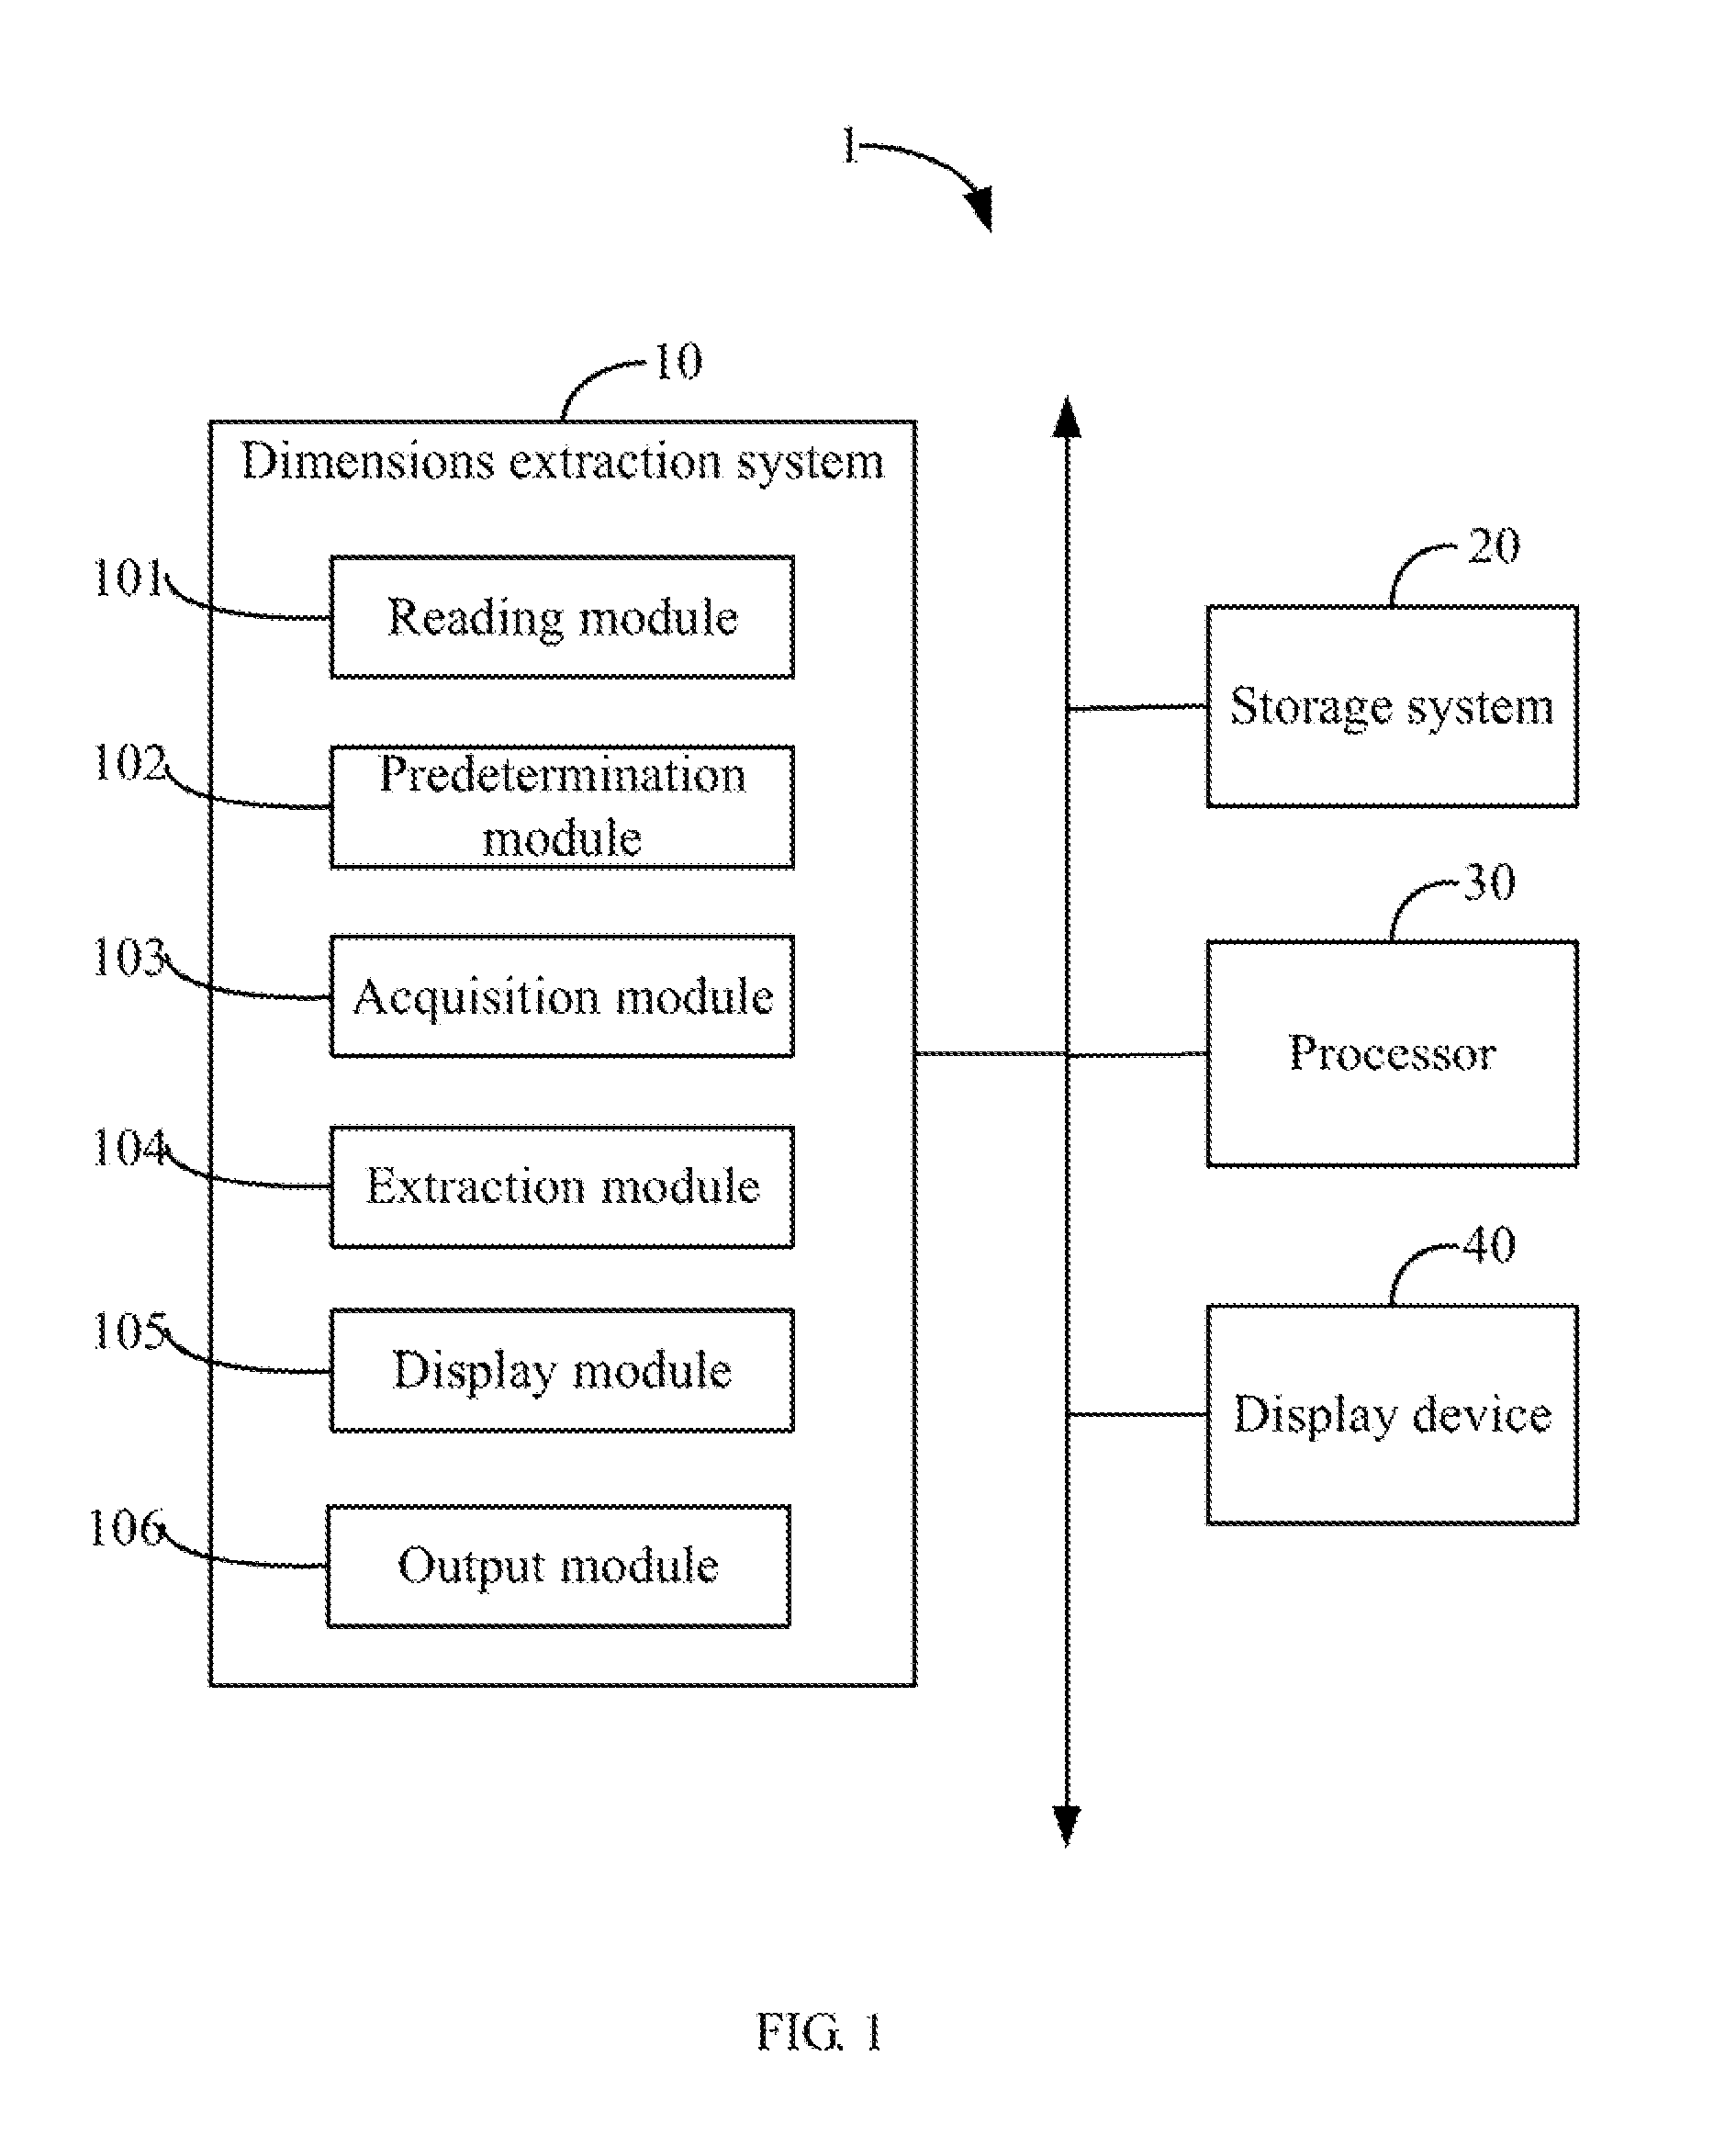 Computing device, storage medium and method for extracting dimensions of product using the computing device